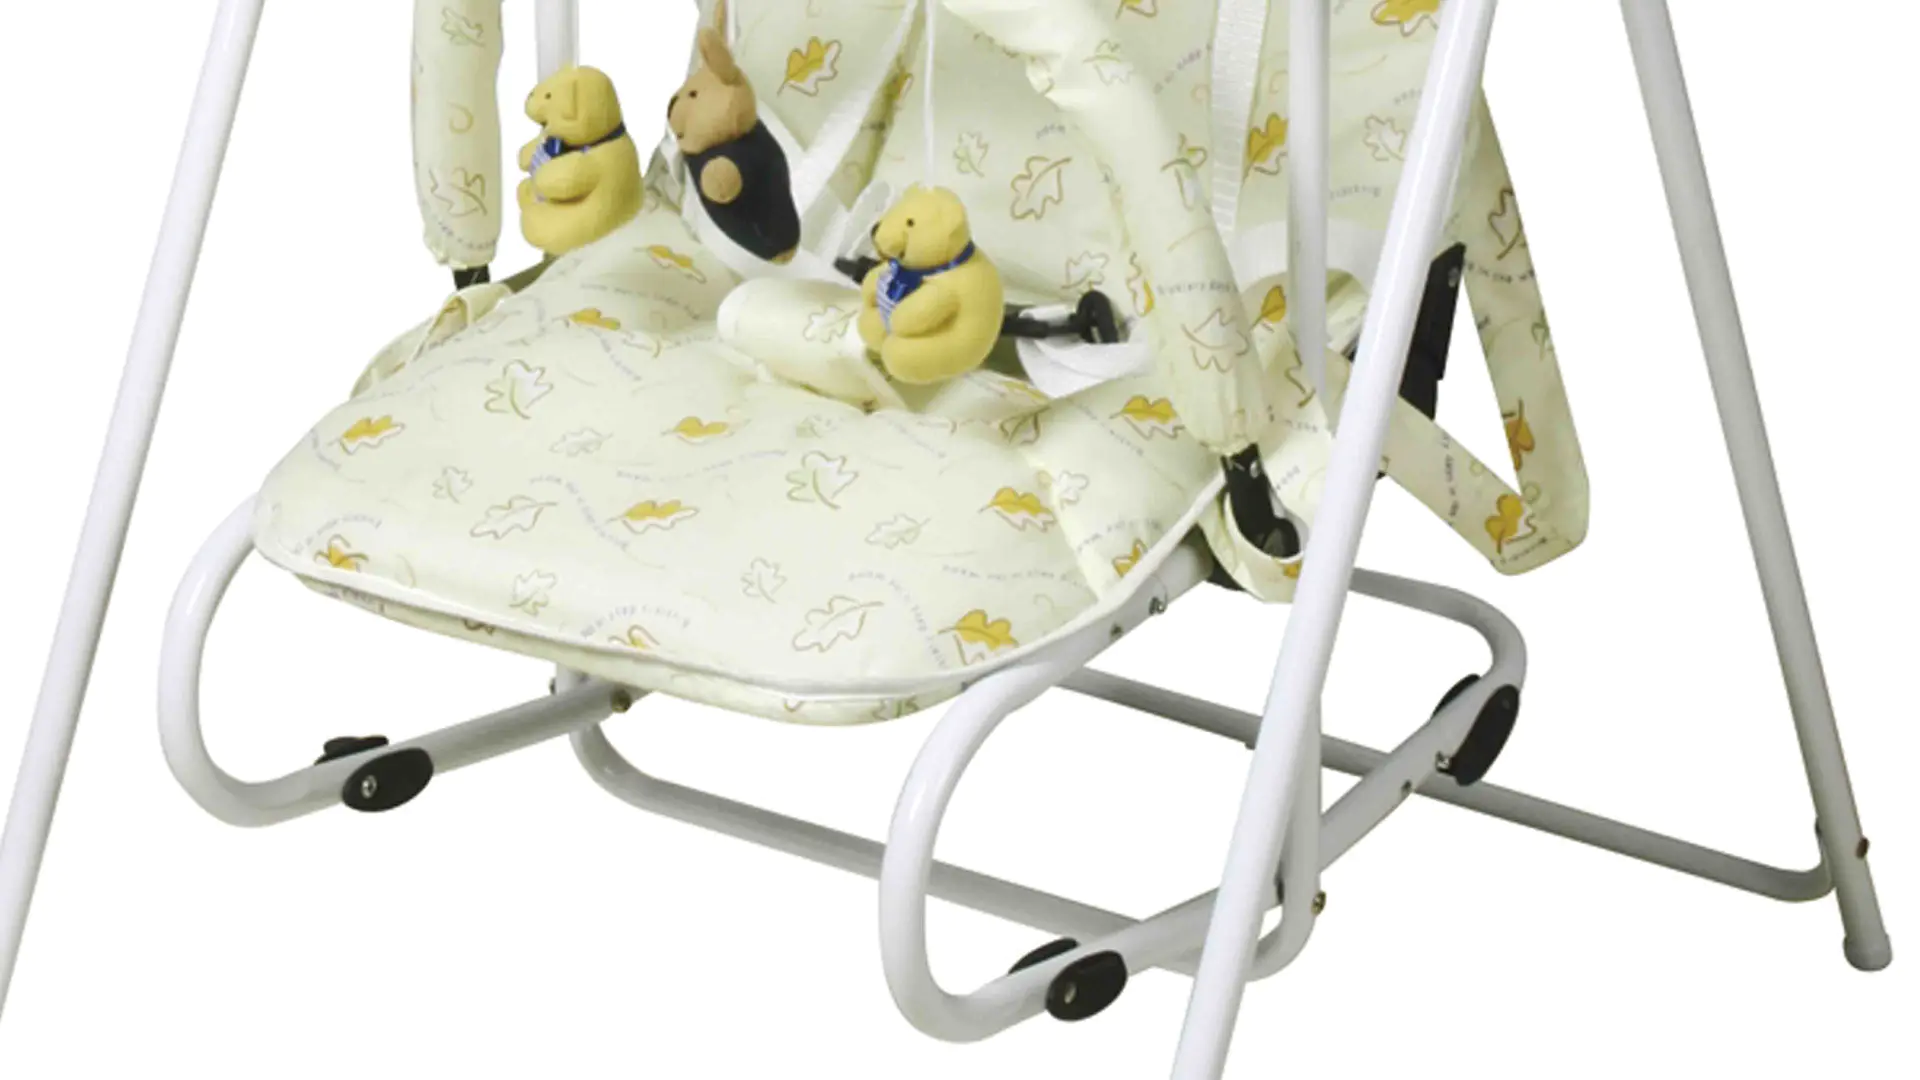 Multifunctional metal baby swing chair with canopy and toys 503A